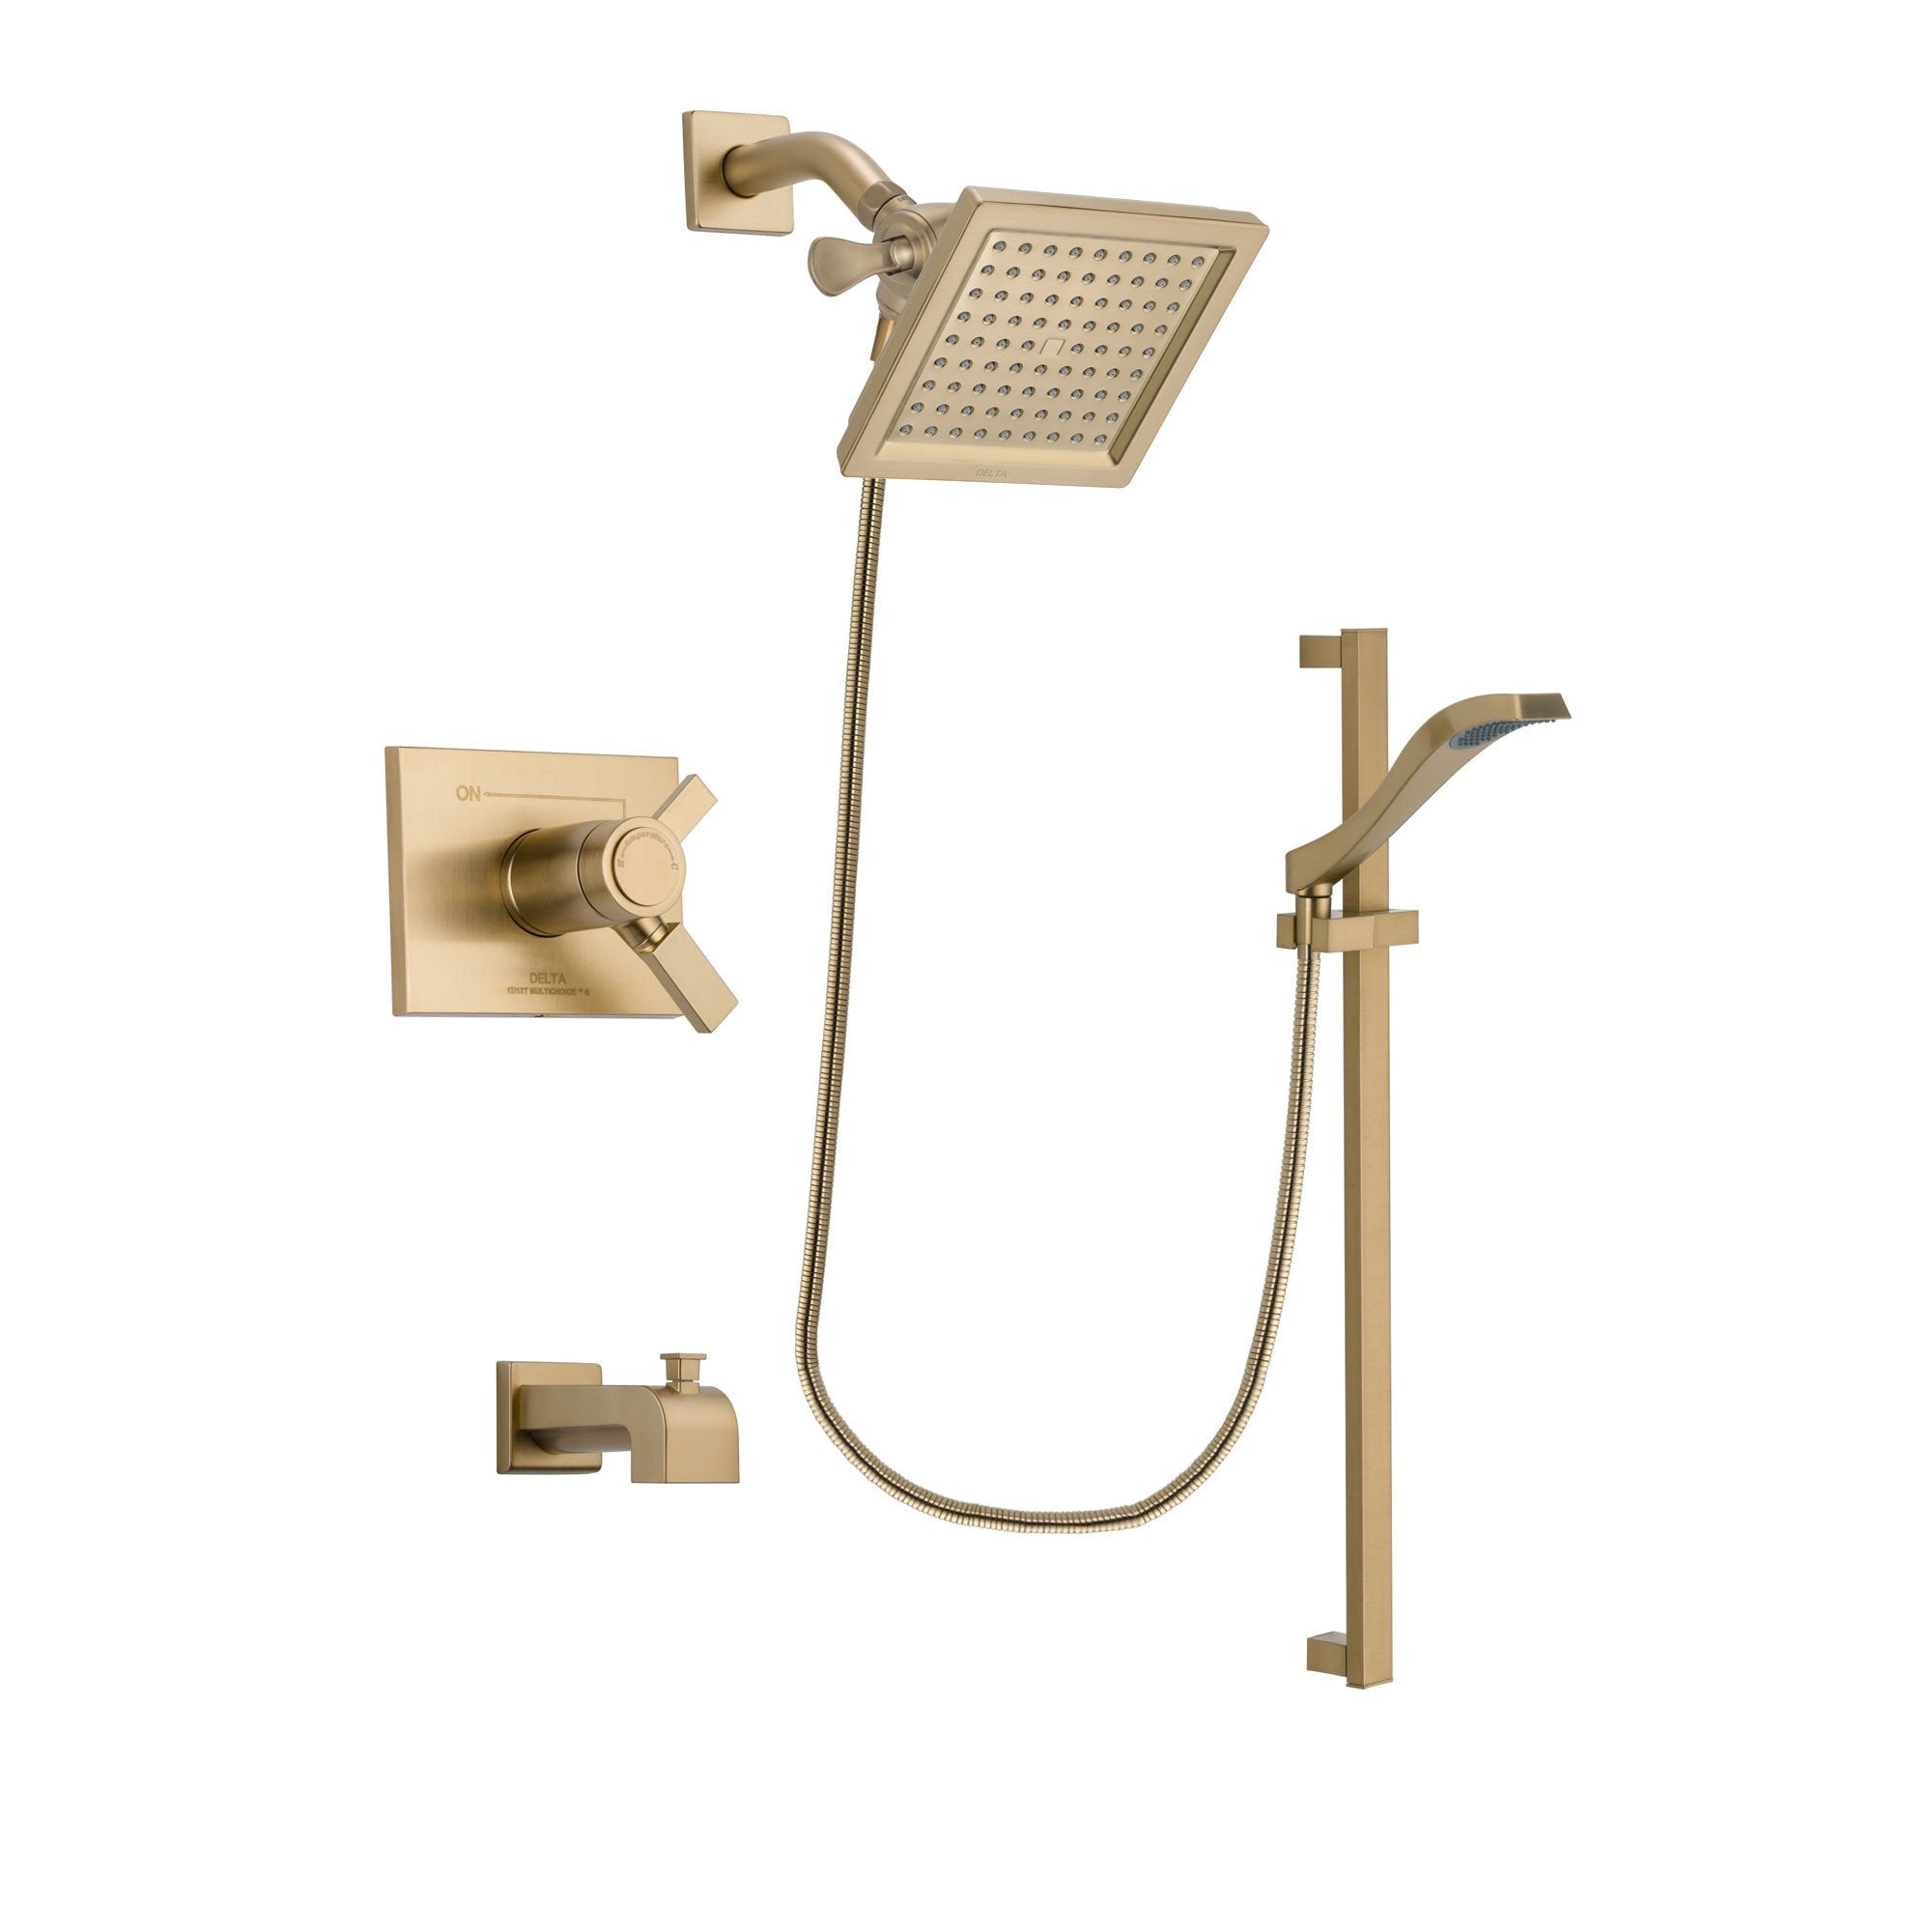 Delta Vero Champagne Bronze Finish Thermostatic Tub and Shower Faucet System Package with 6.5-inch Square Rain Showerhead and Modern Handheld Shower Spray with Slide Bar Includes Rough-in Valve and Tub Spout DSP3923V